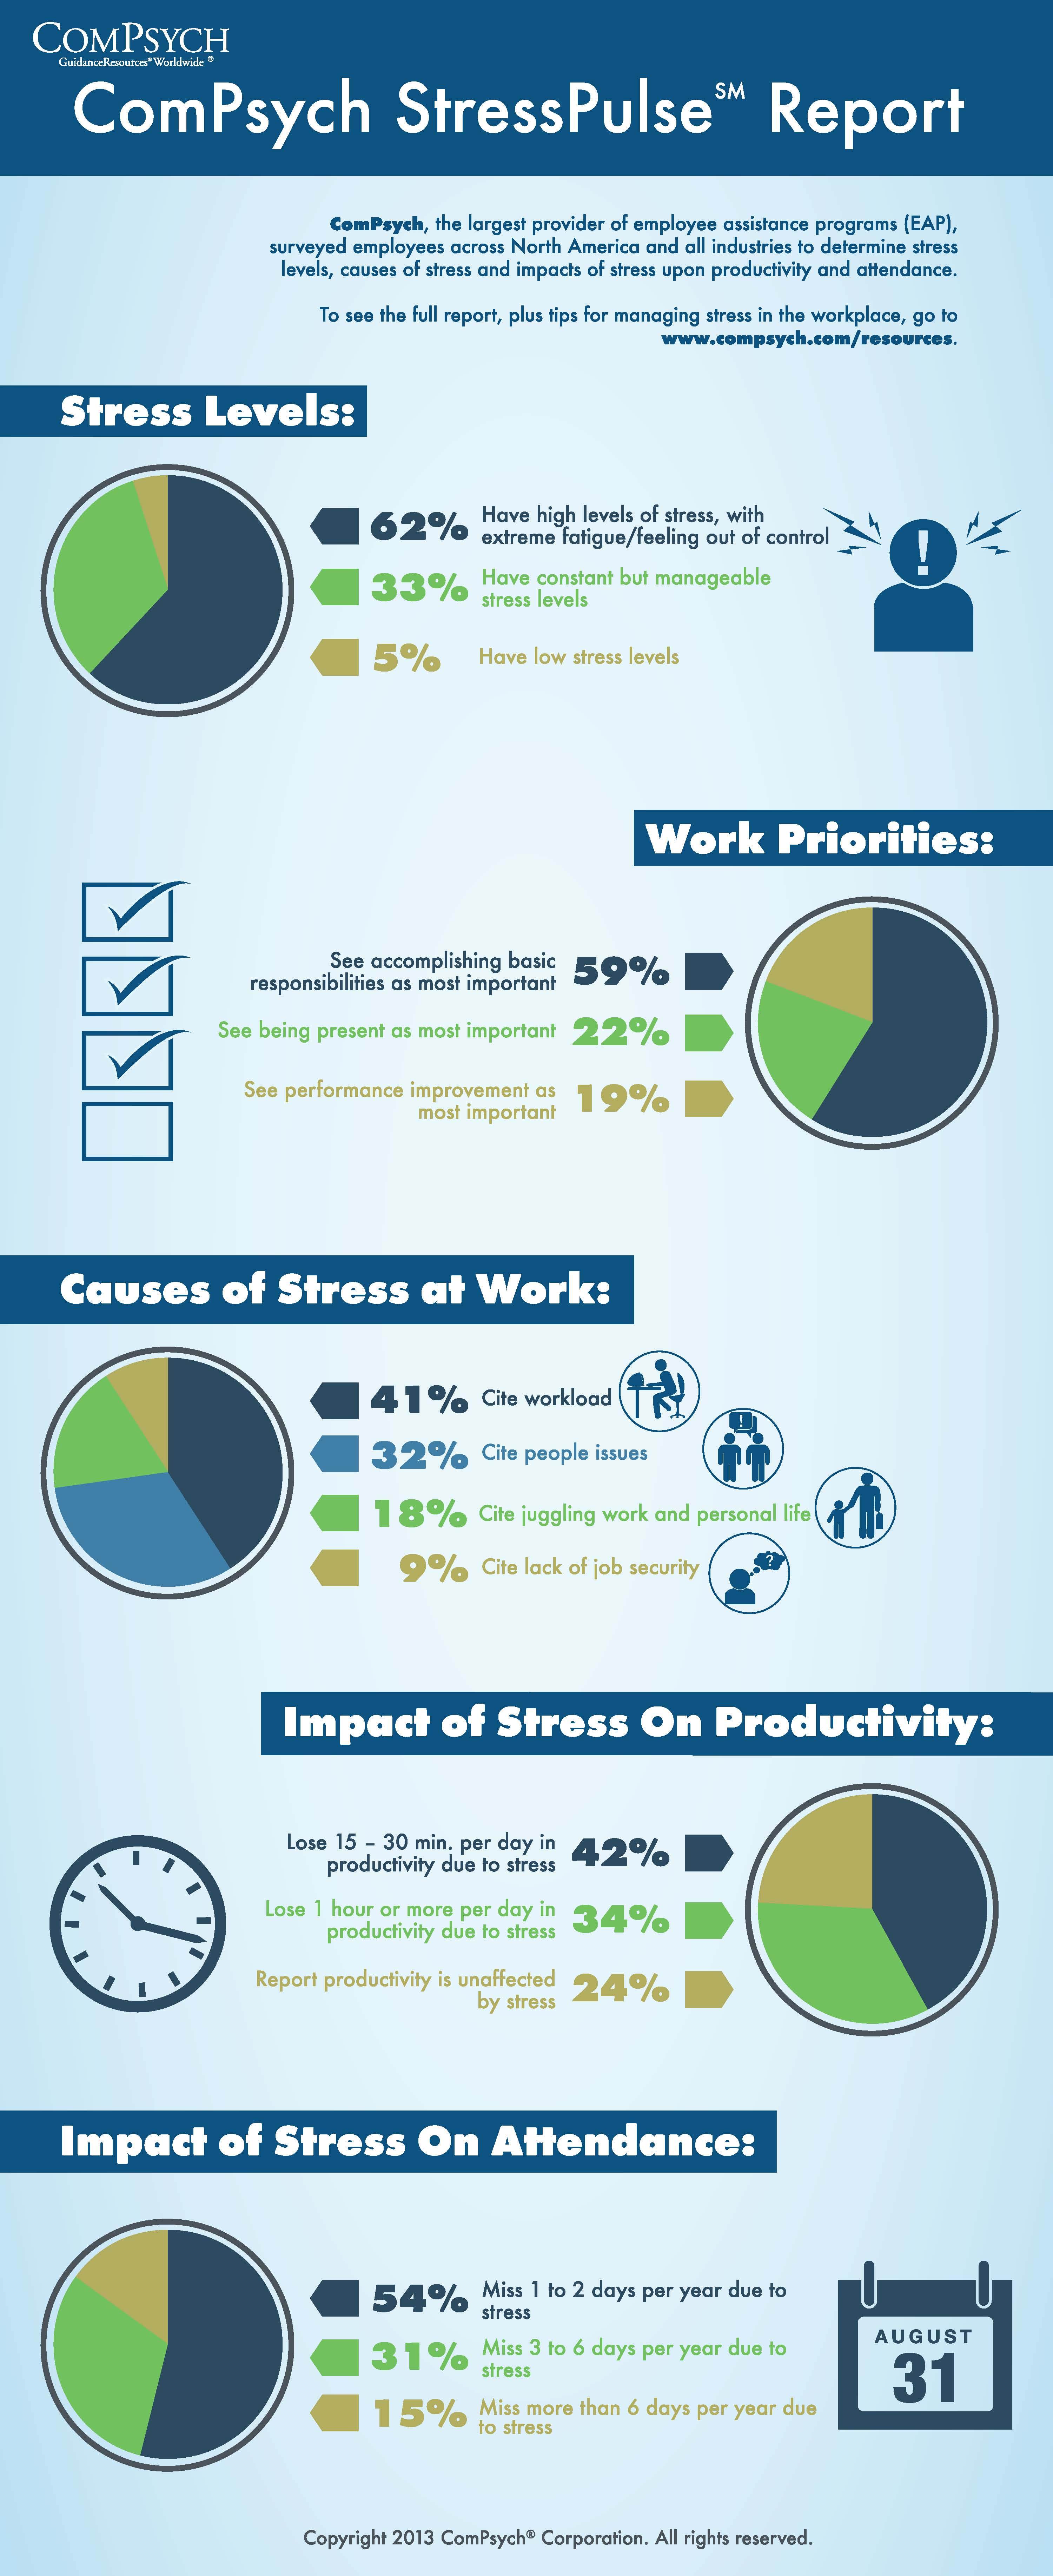 ComPsych Logo - Elevated Stress Levels Are the “New Norm” for Employees, According ...